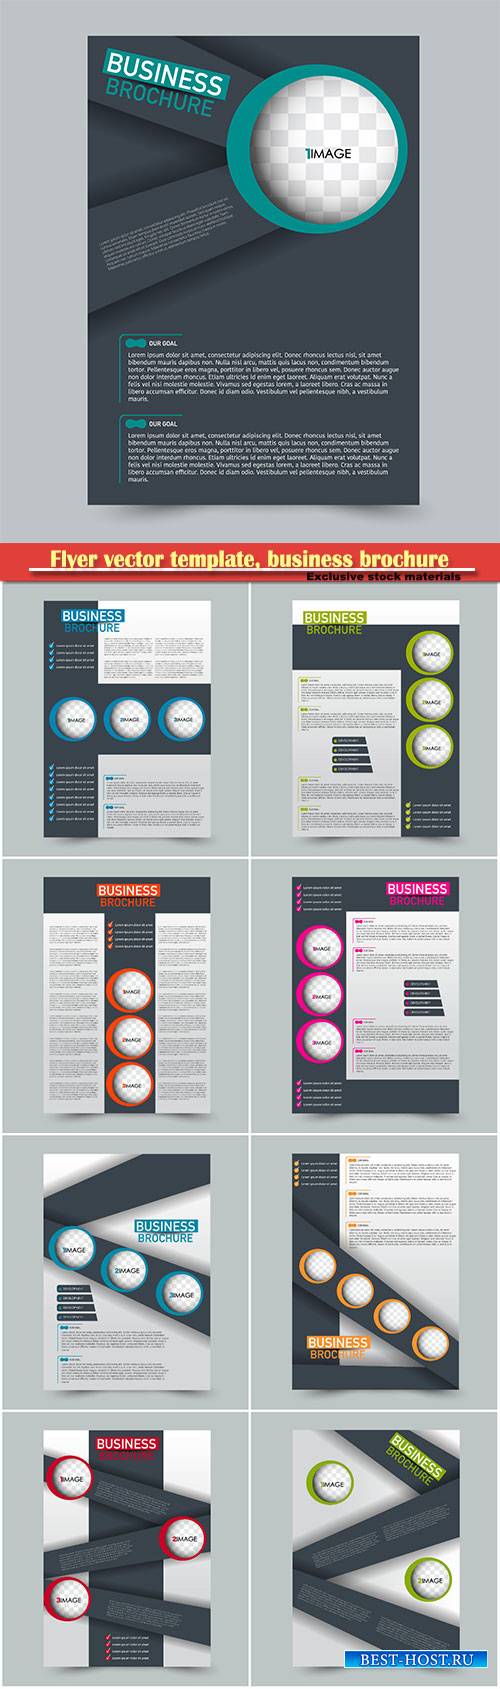 Flyer vector template, business brochure, magazine cover # 13